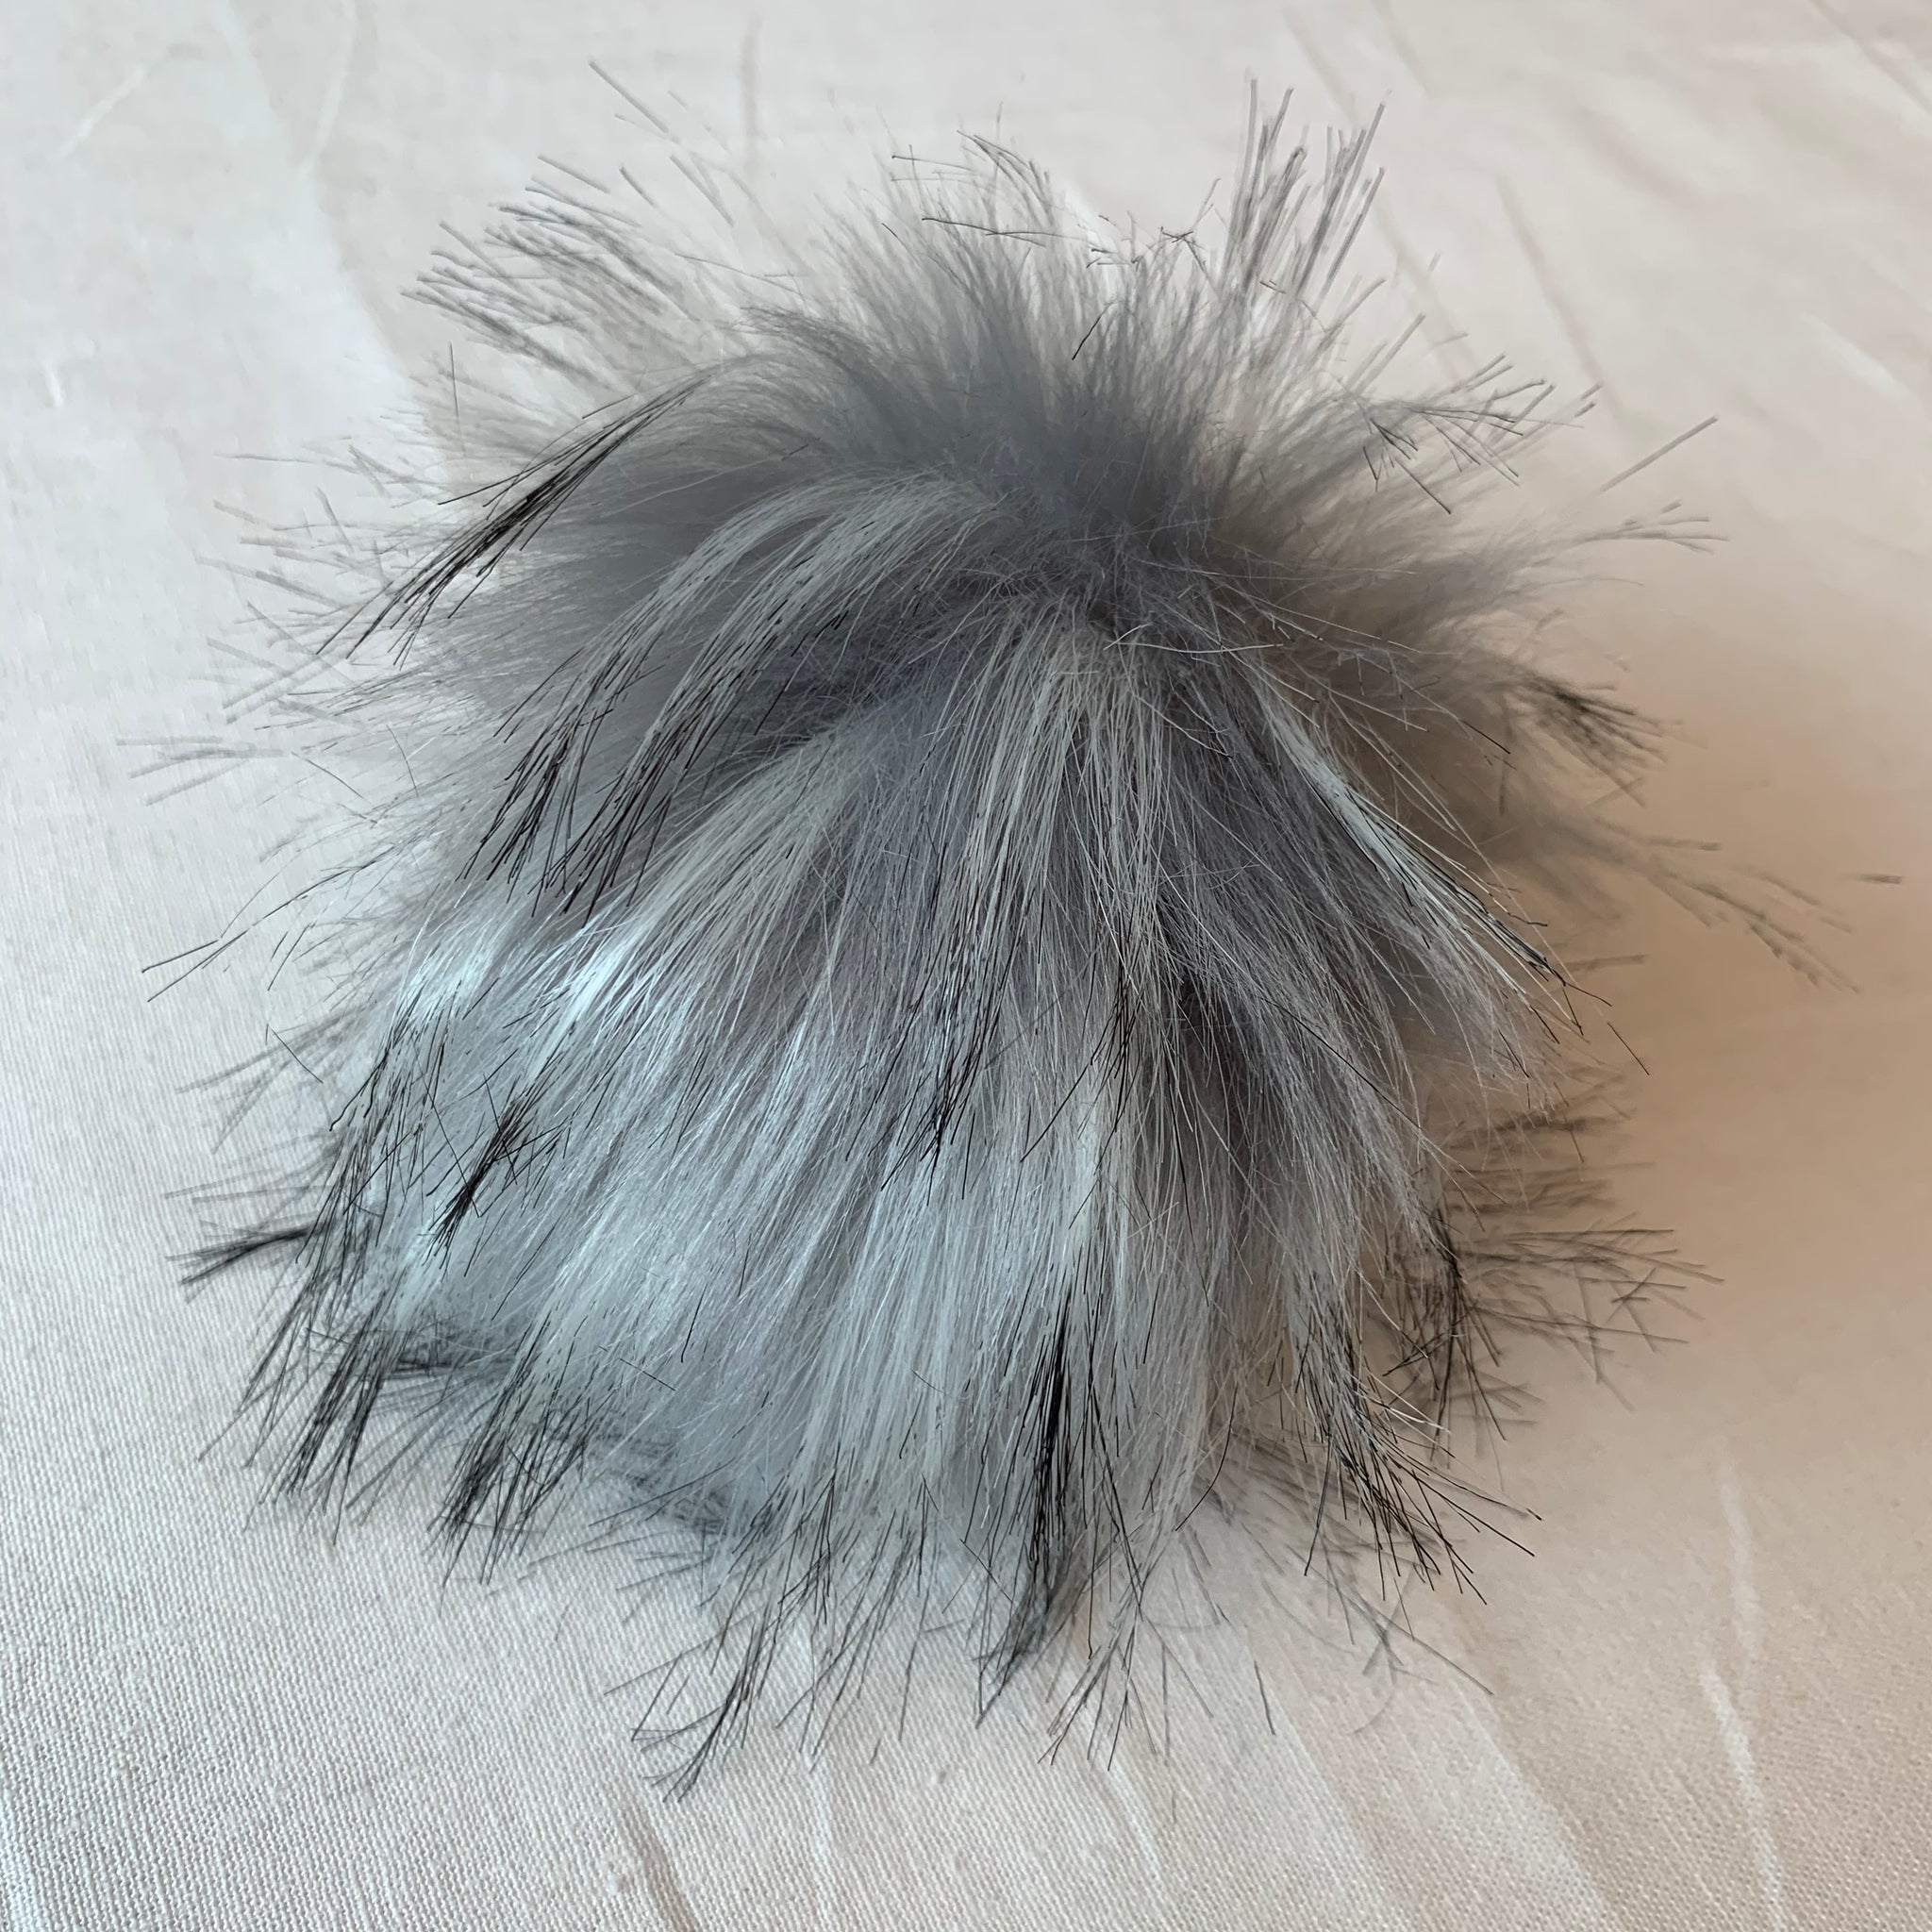 Shades of Gray Collection of Faux Fur Pom Poms for Hats and Crafts 4 Inch  Pompons in a Variety of Dark to Light Grey With Loop Ties or Snaps 